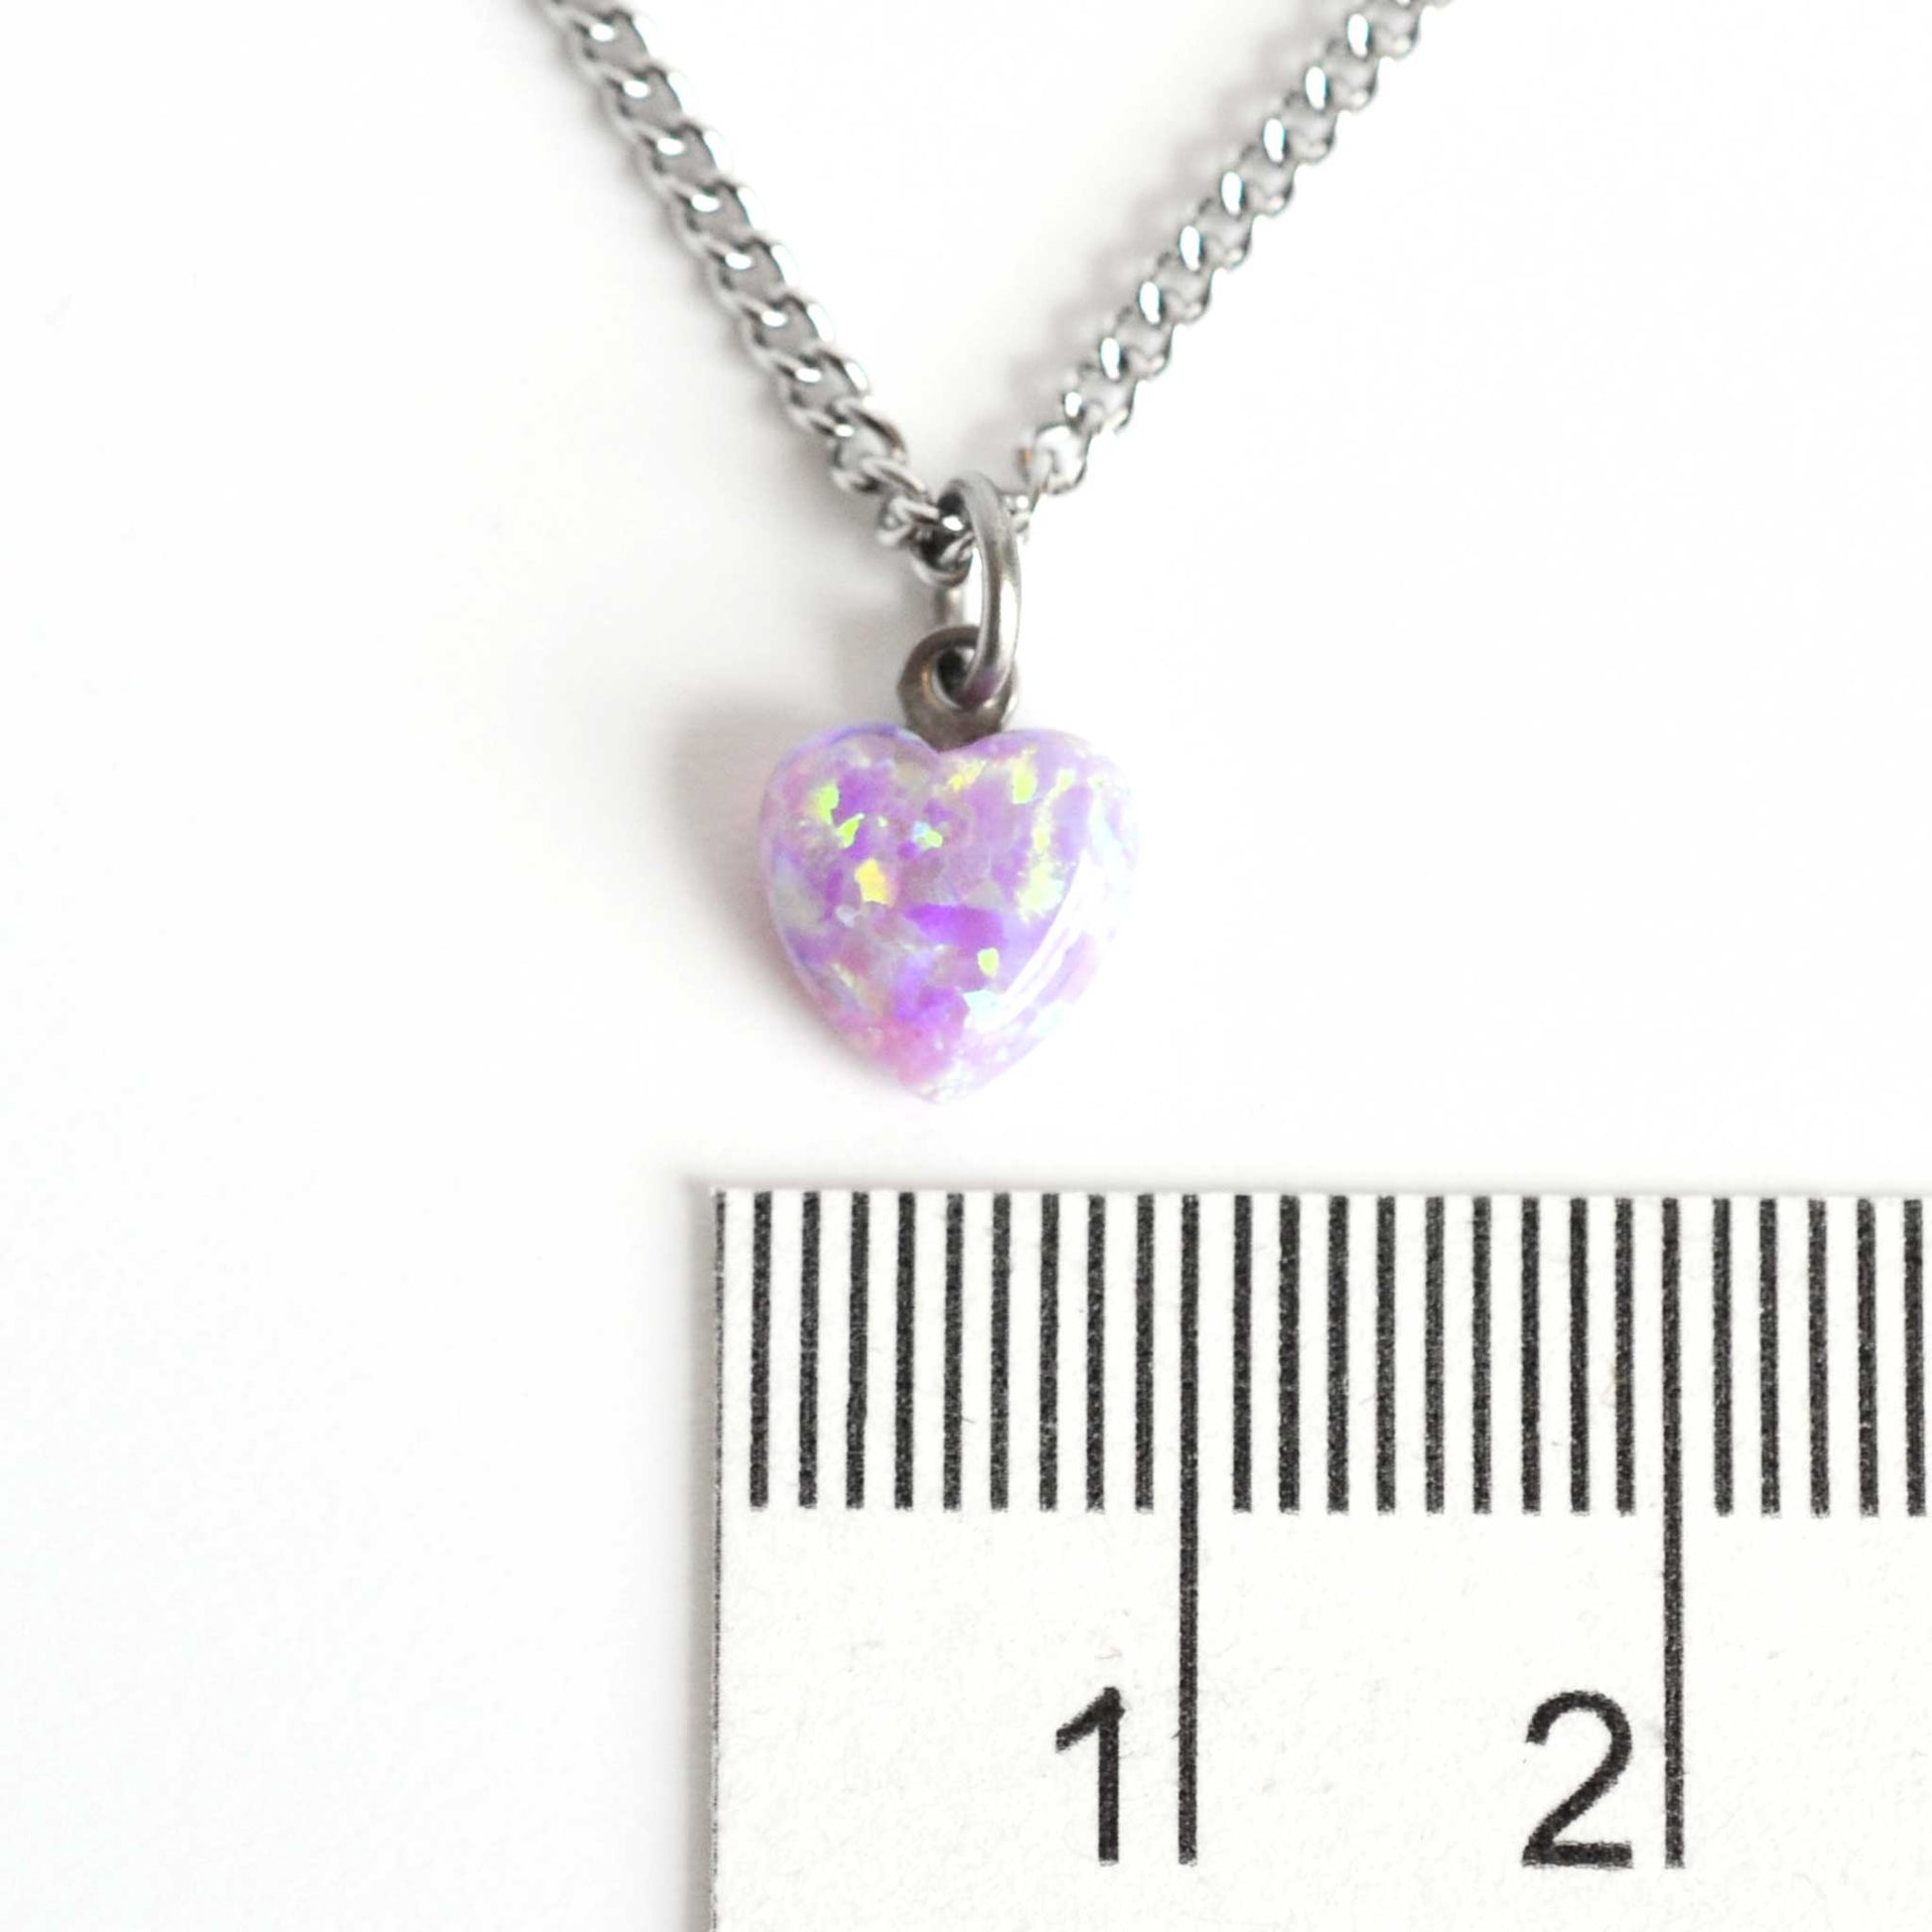 8mm pink heart necklace next to ruler